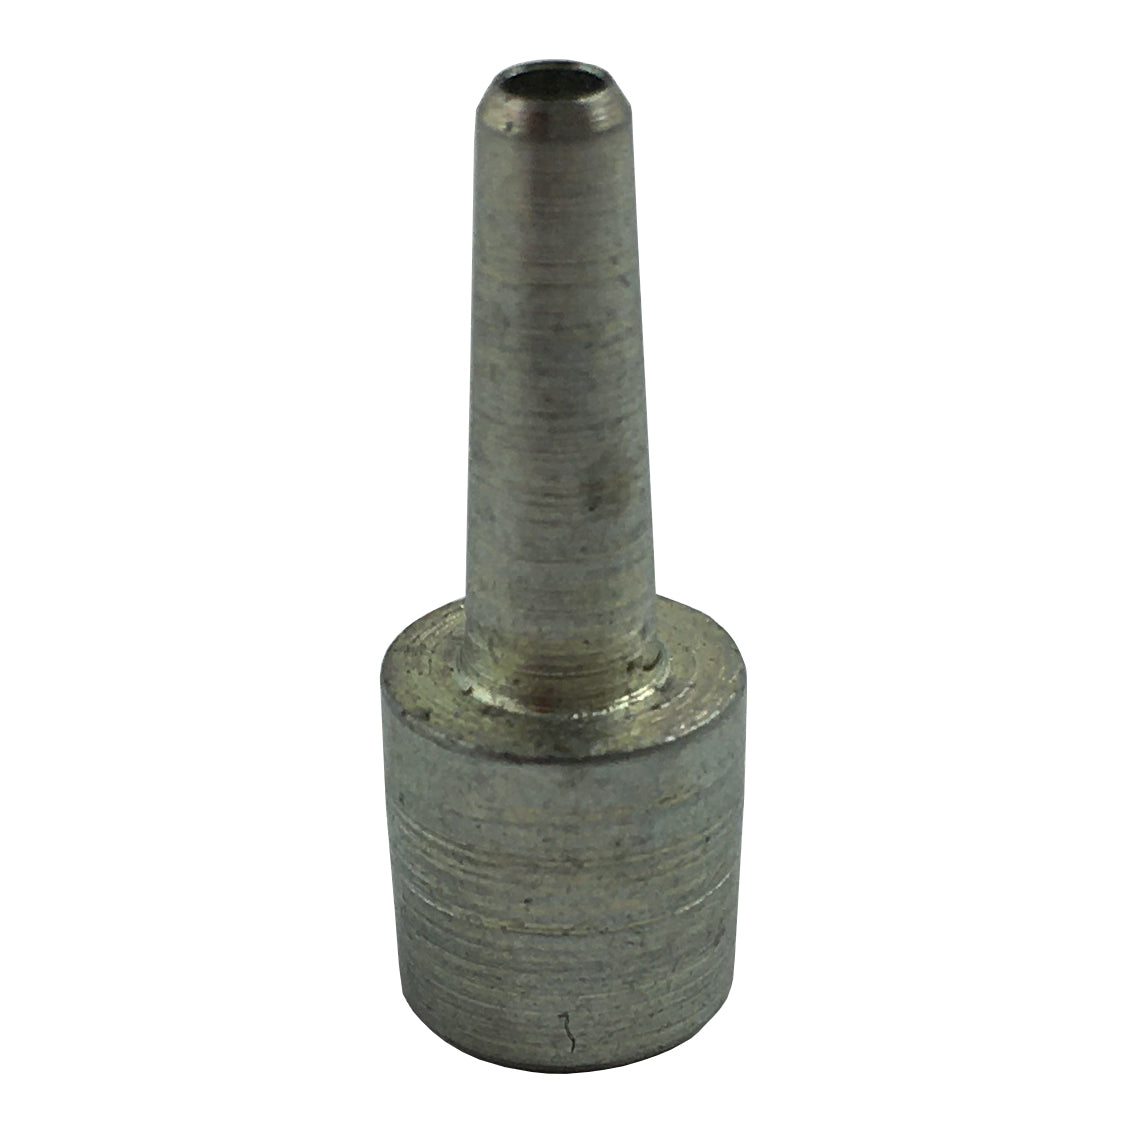 Maun Wad REPLACEMENT Punch 4.0mm 5/32" #5